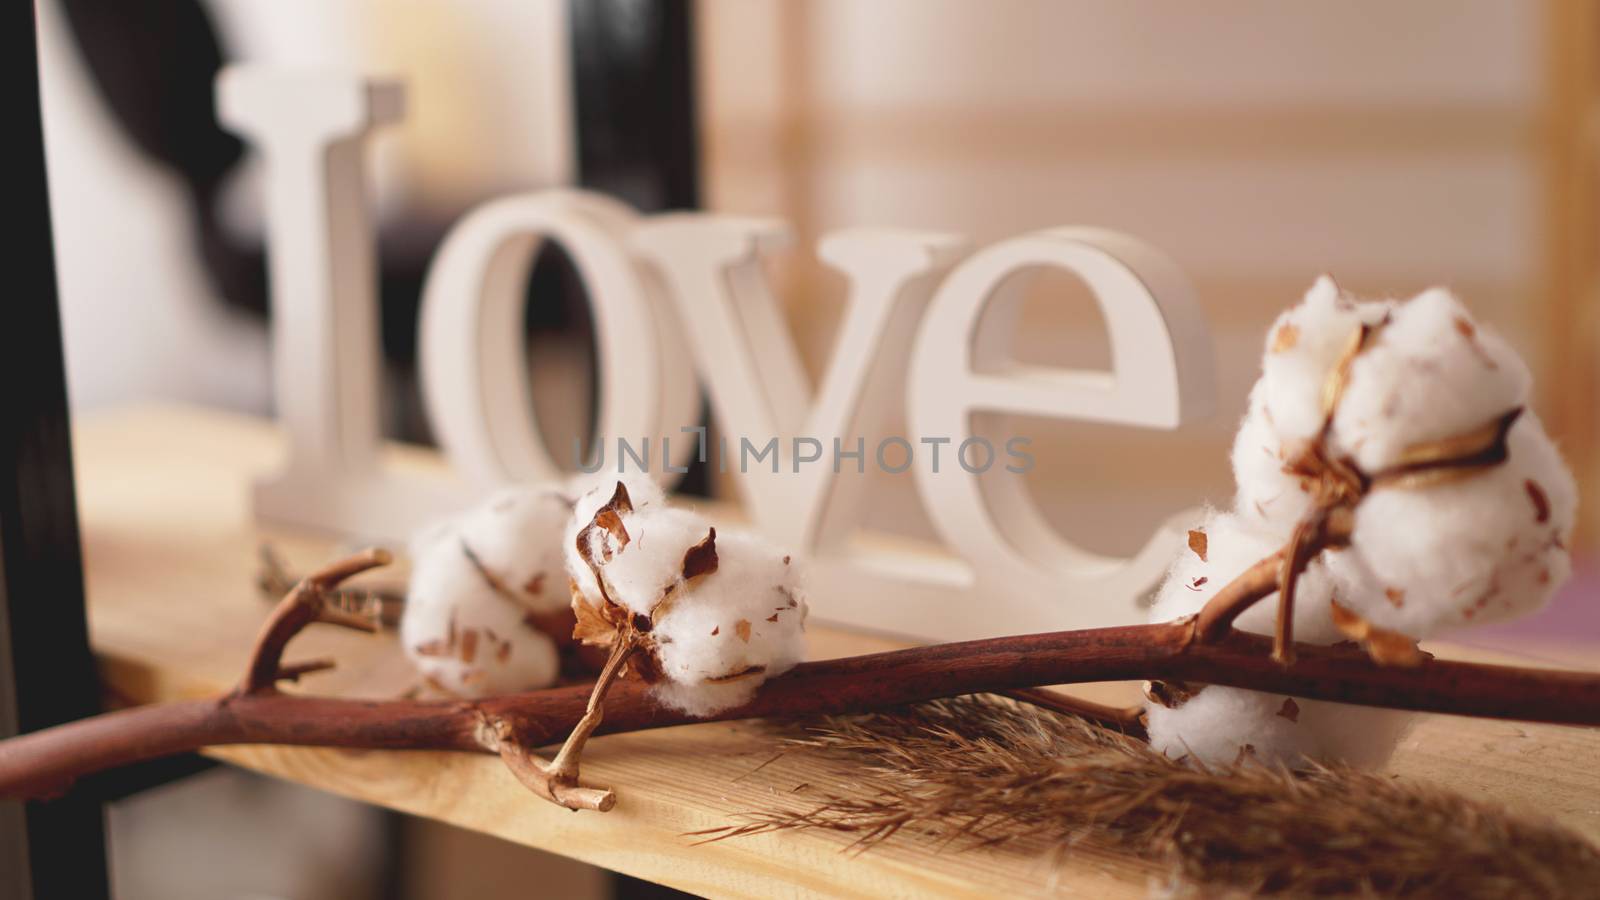 Love wooden letters, vintage styled and cotton flower by natali_brill